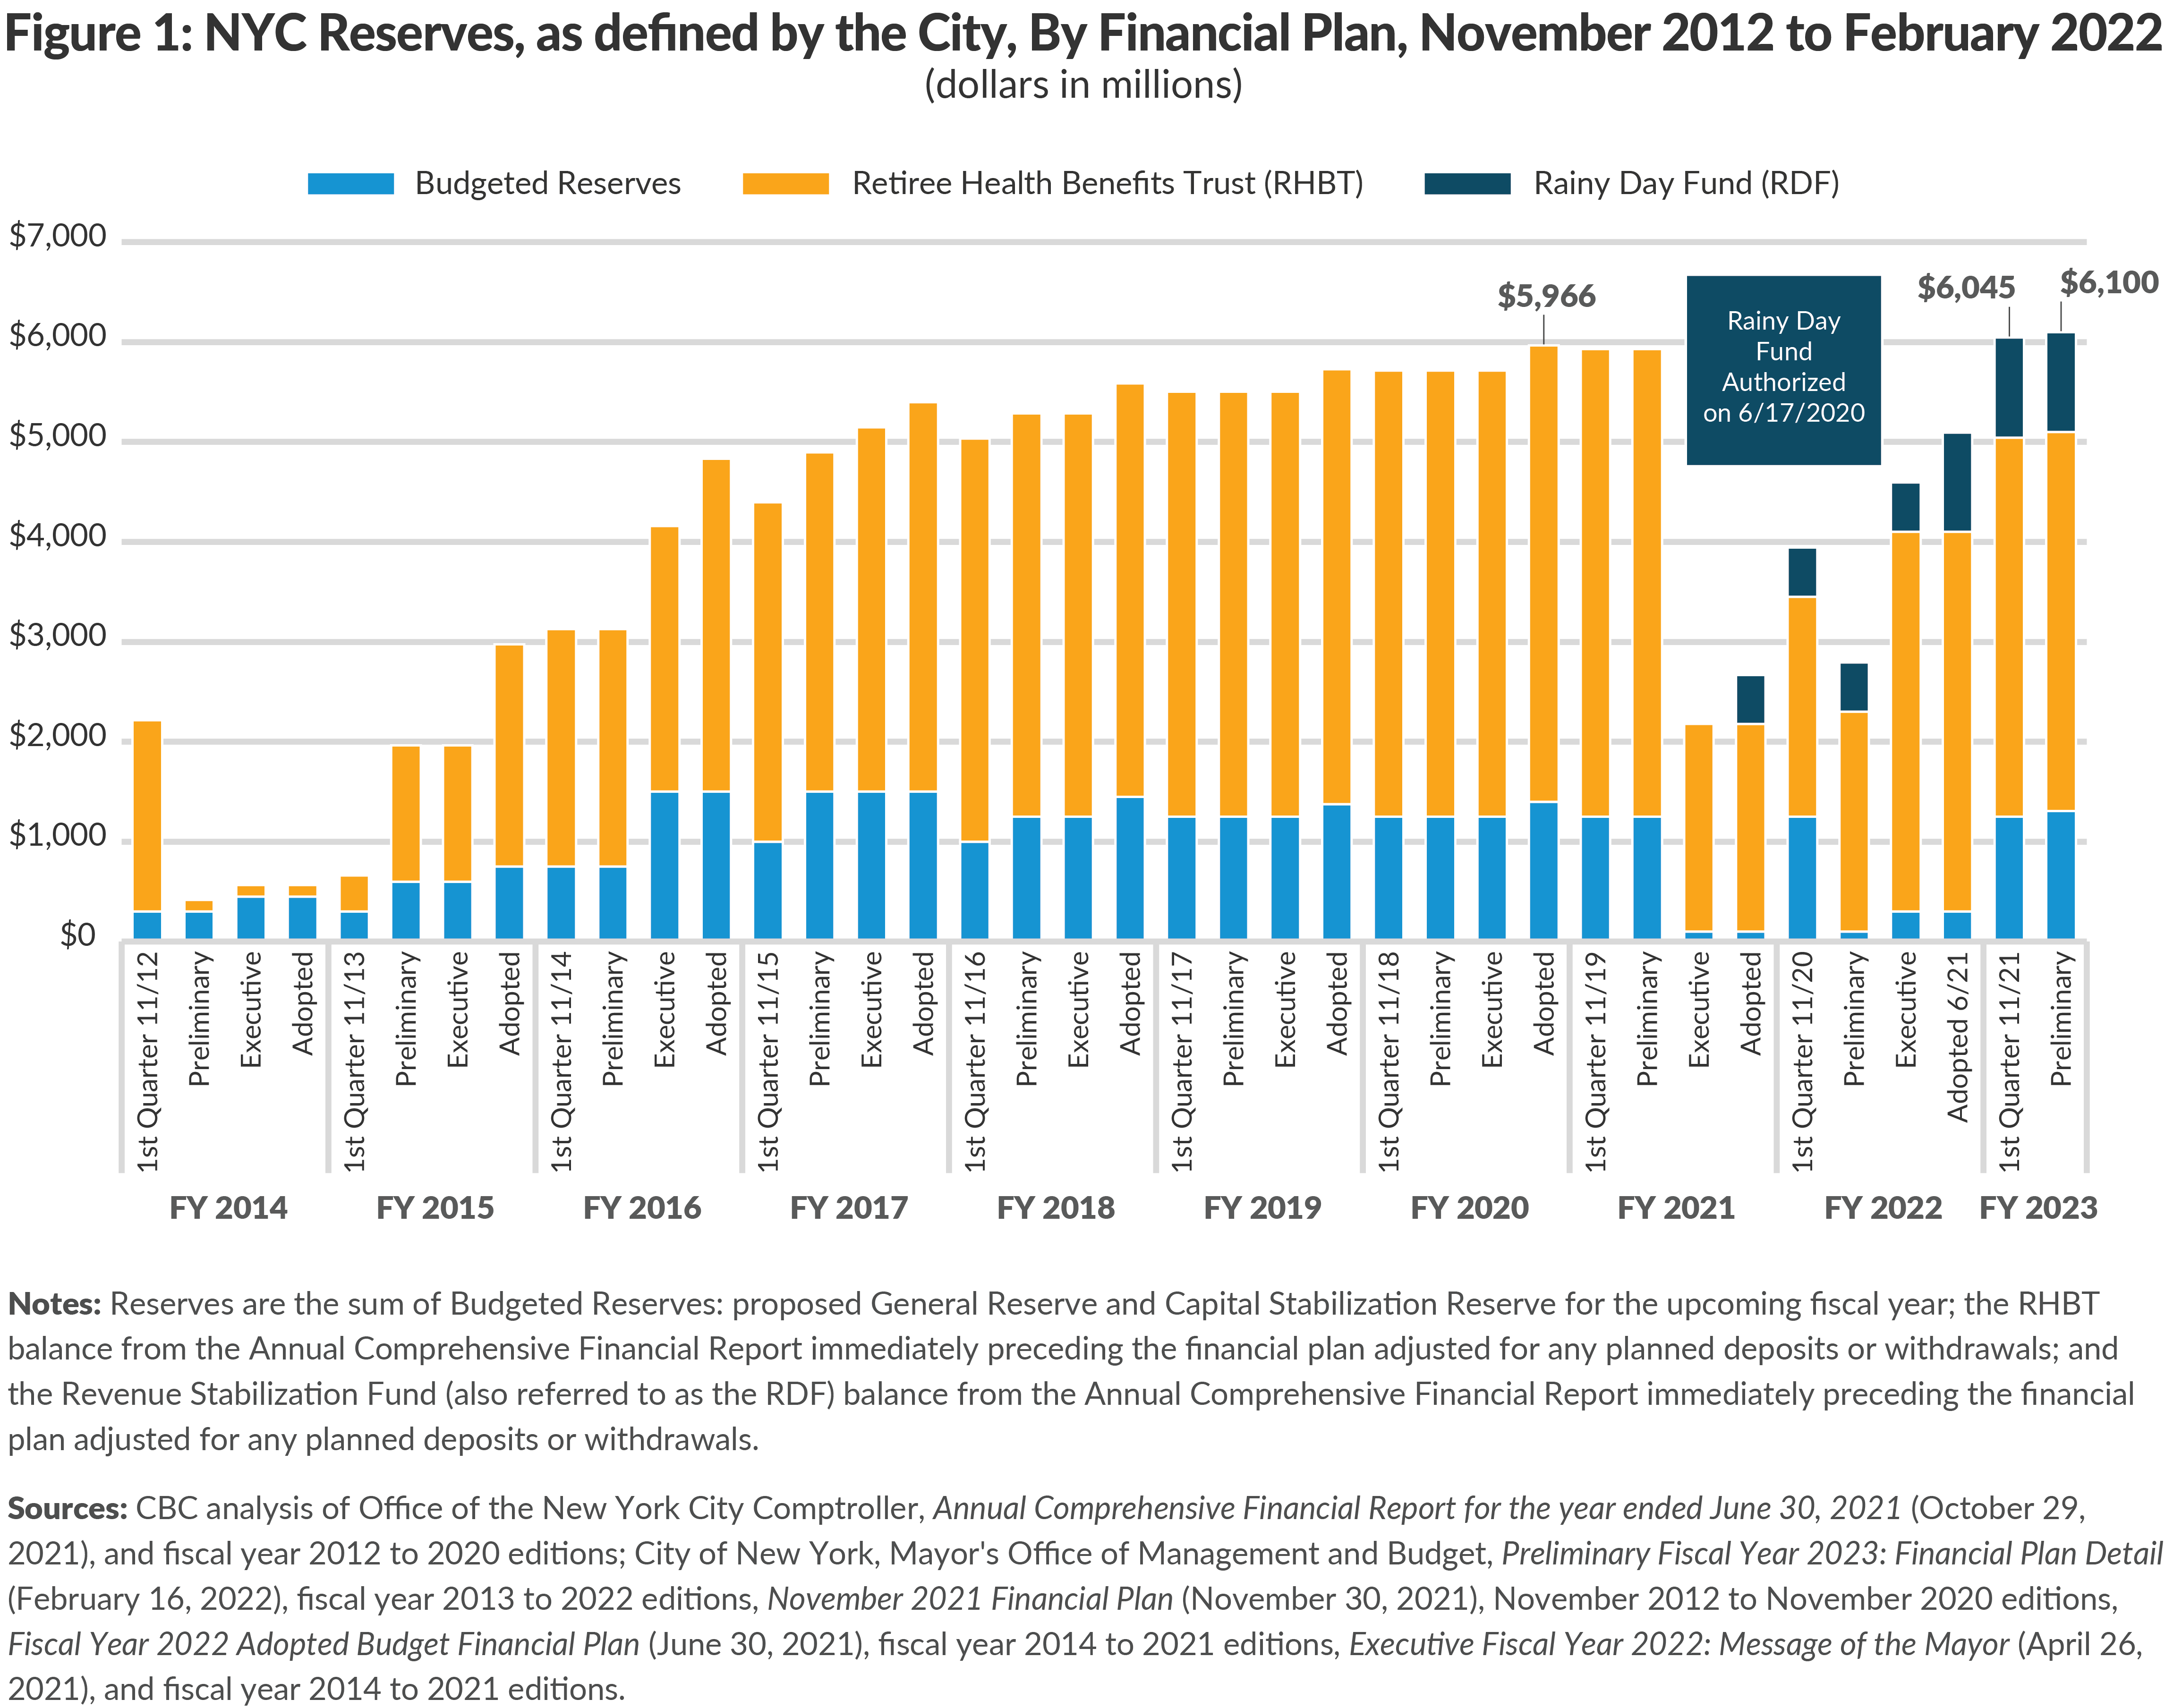 Figure 1: NYC Reserves, as defined by the City, By Financial Plan, November 2012 - February 2022